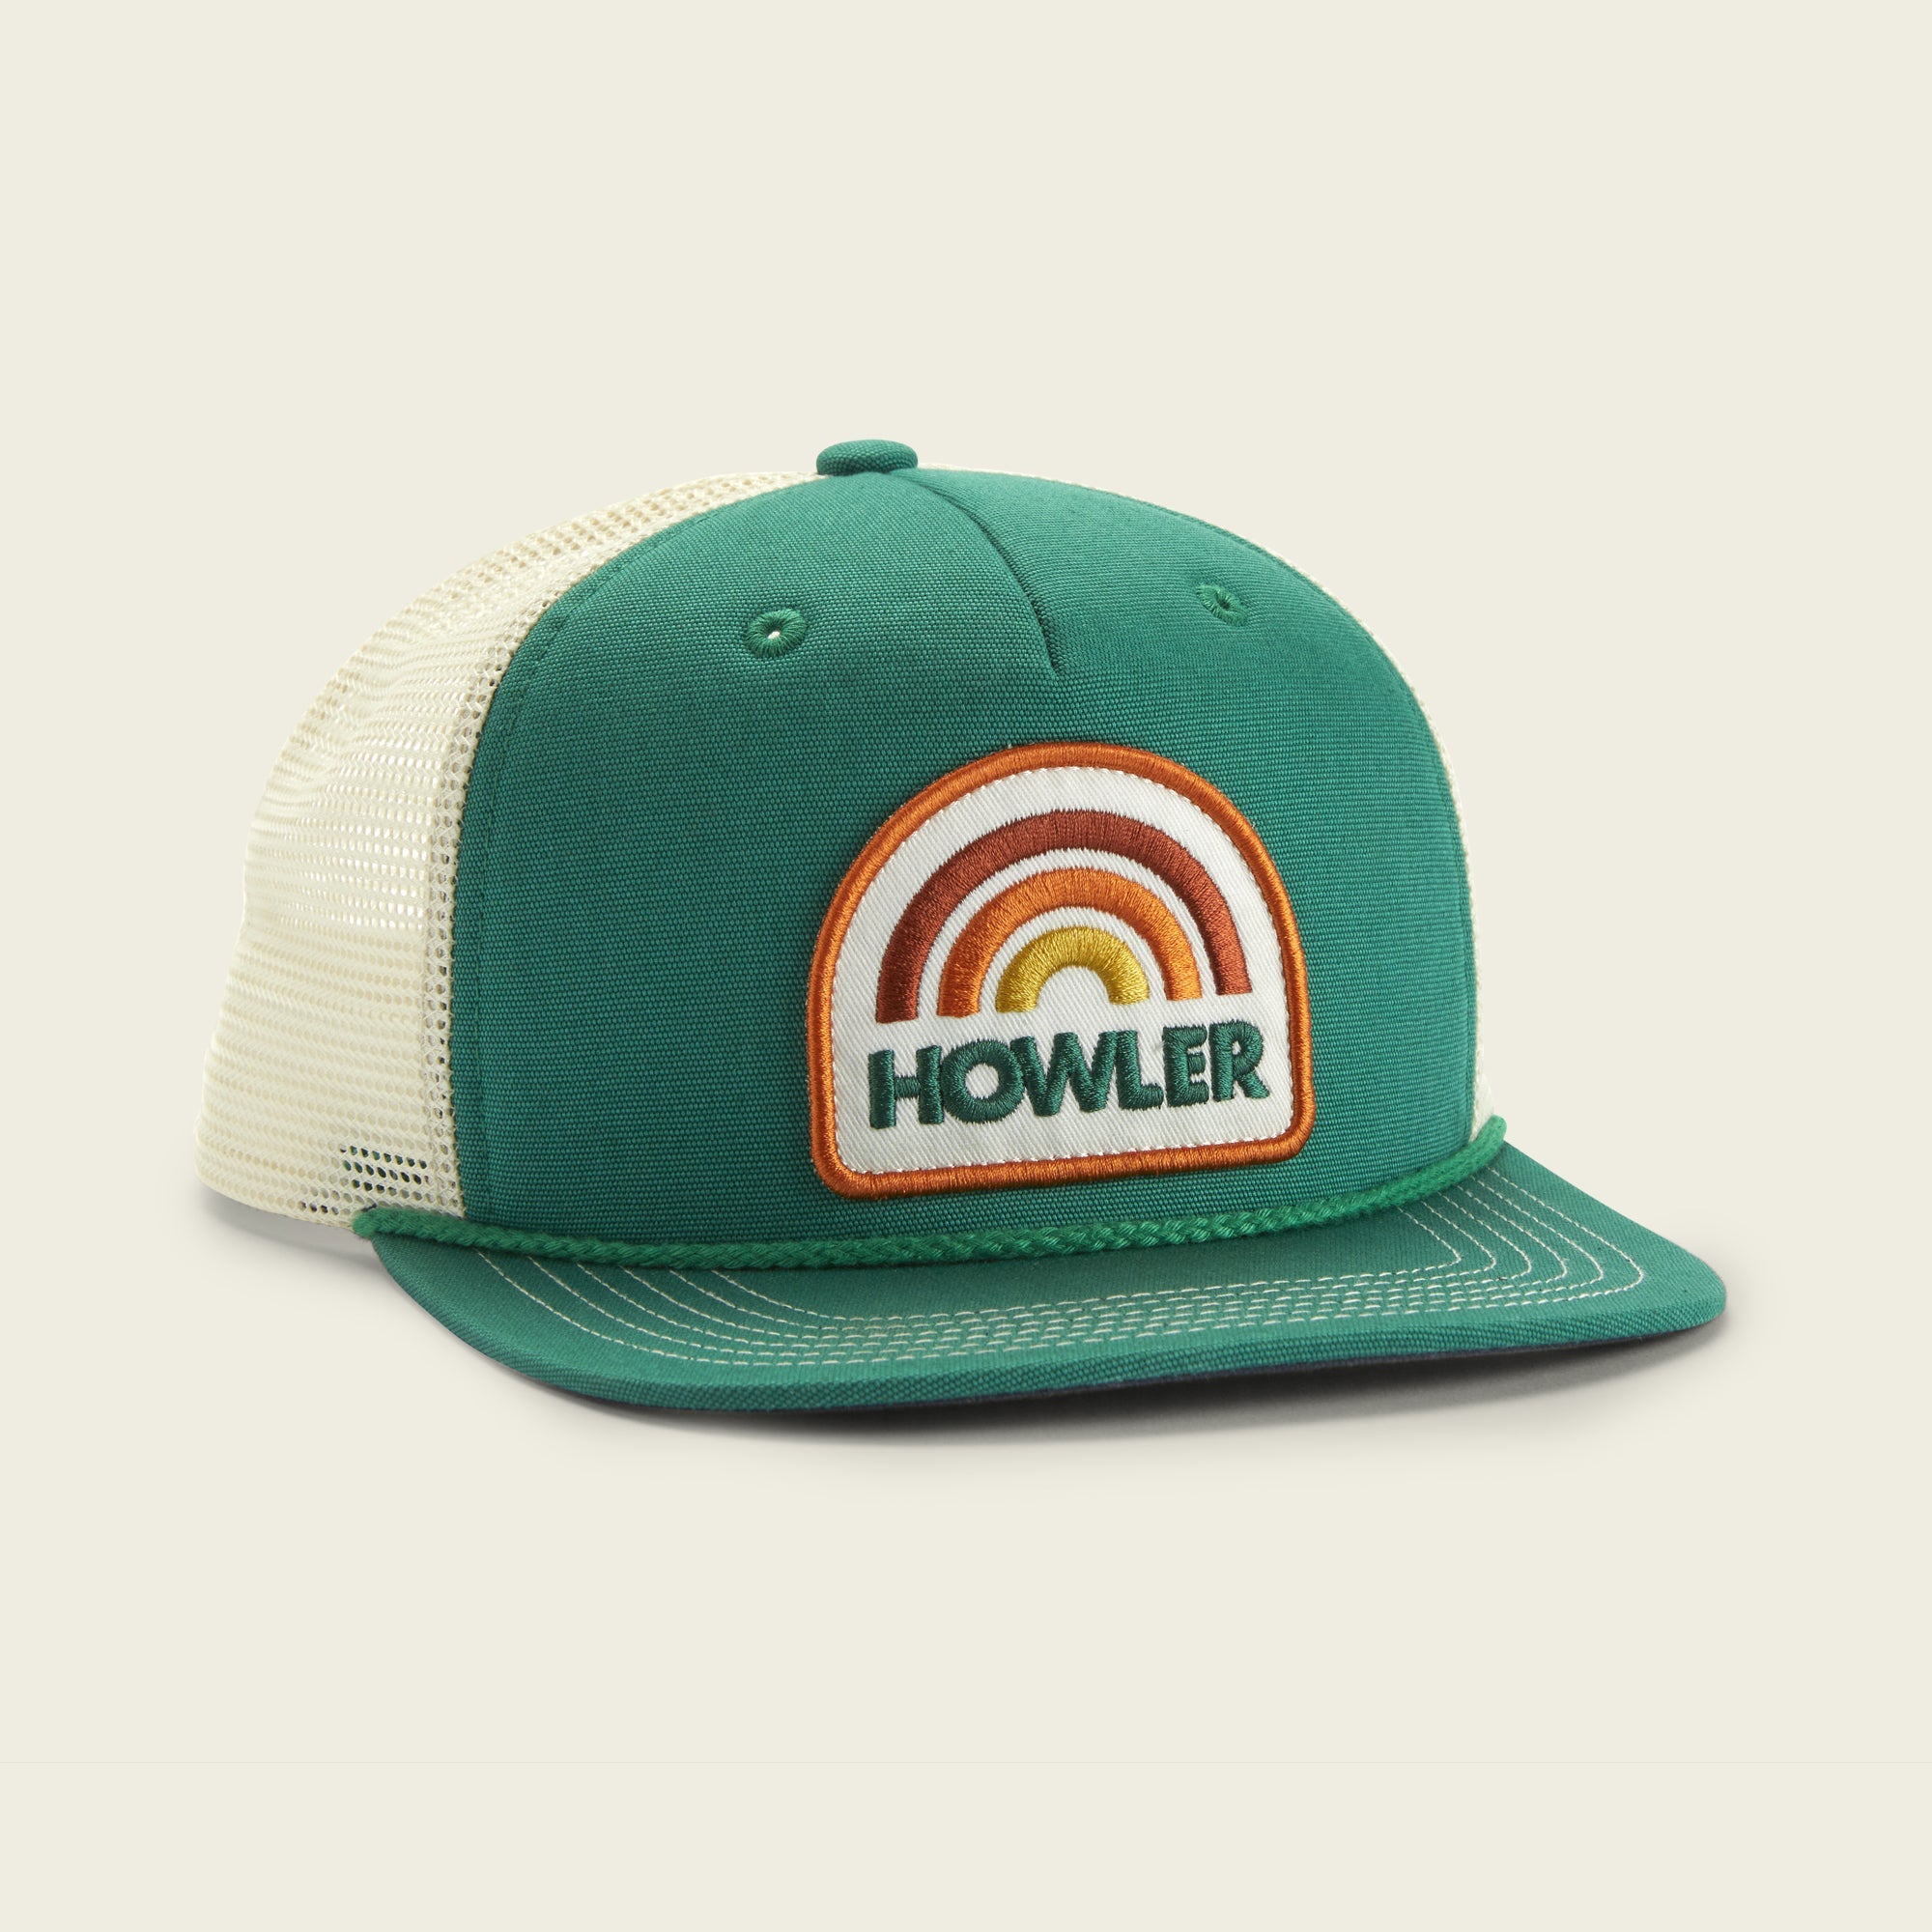 Hats - Dad Hats, Beanies, Flat Bills and More - Rowing Blazers